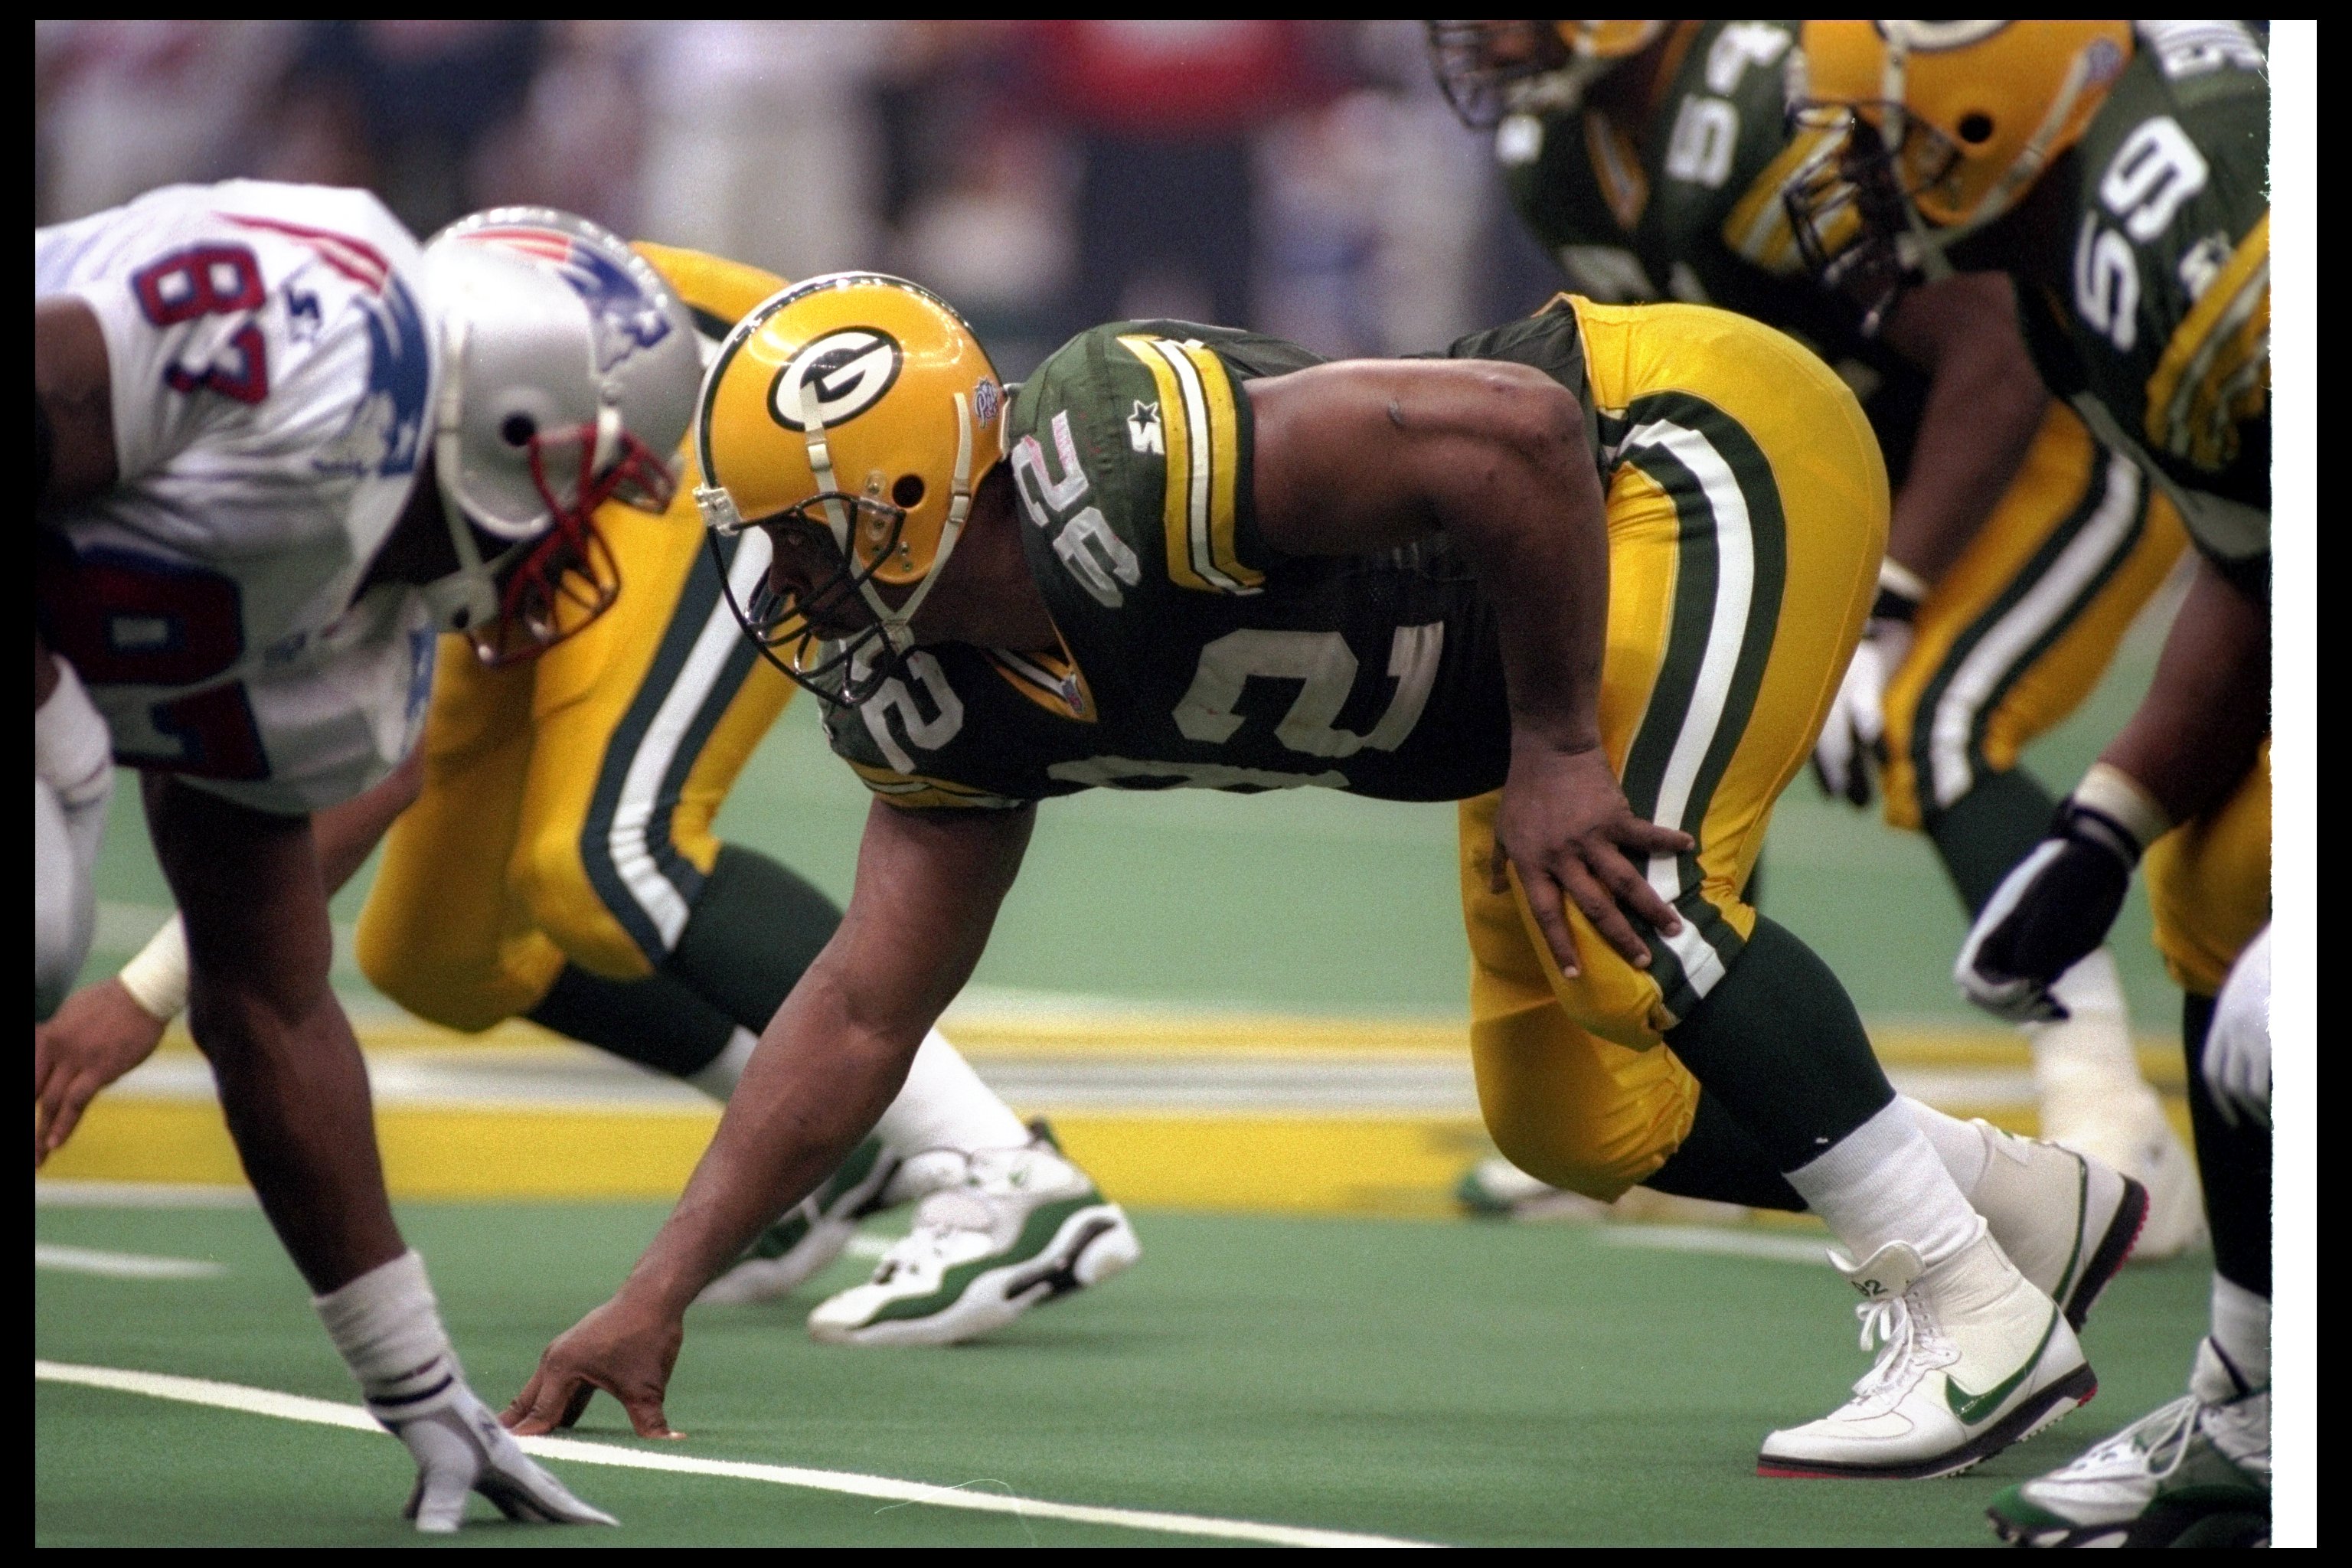 Super Bowl 2011: Comparing the Green Bay Packers' 1996 and 2010